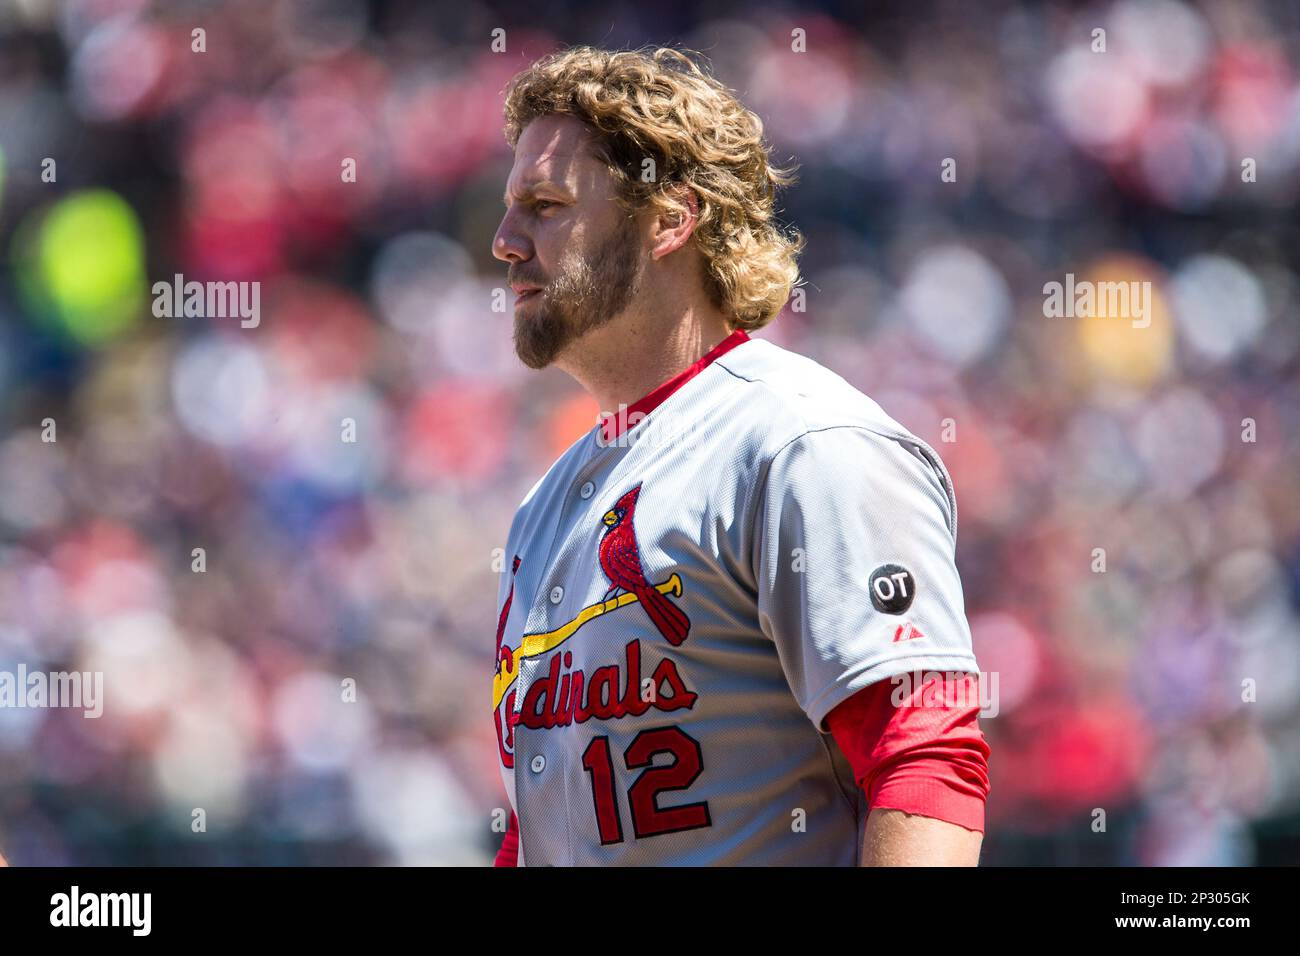 CLEVELAND, OH - JULY 28: Yadier Molina (4) of the St. Louis Cardinals looks  on while waiting to bat during a game against the Cleveland Indians at Pro  Stock Photo - Alamy